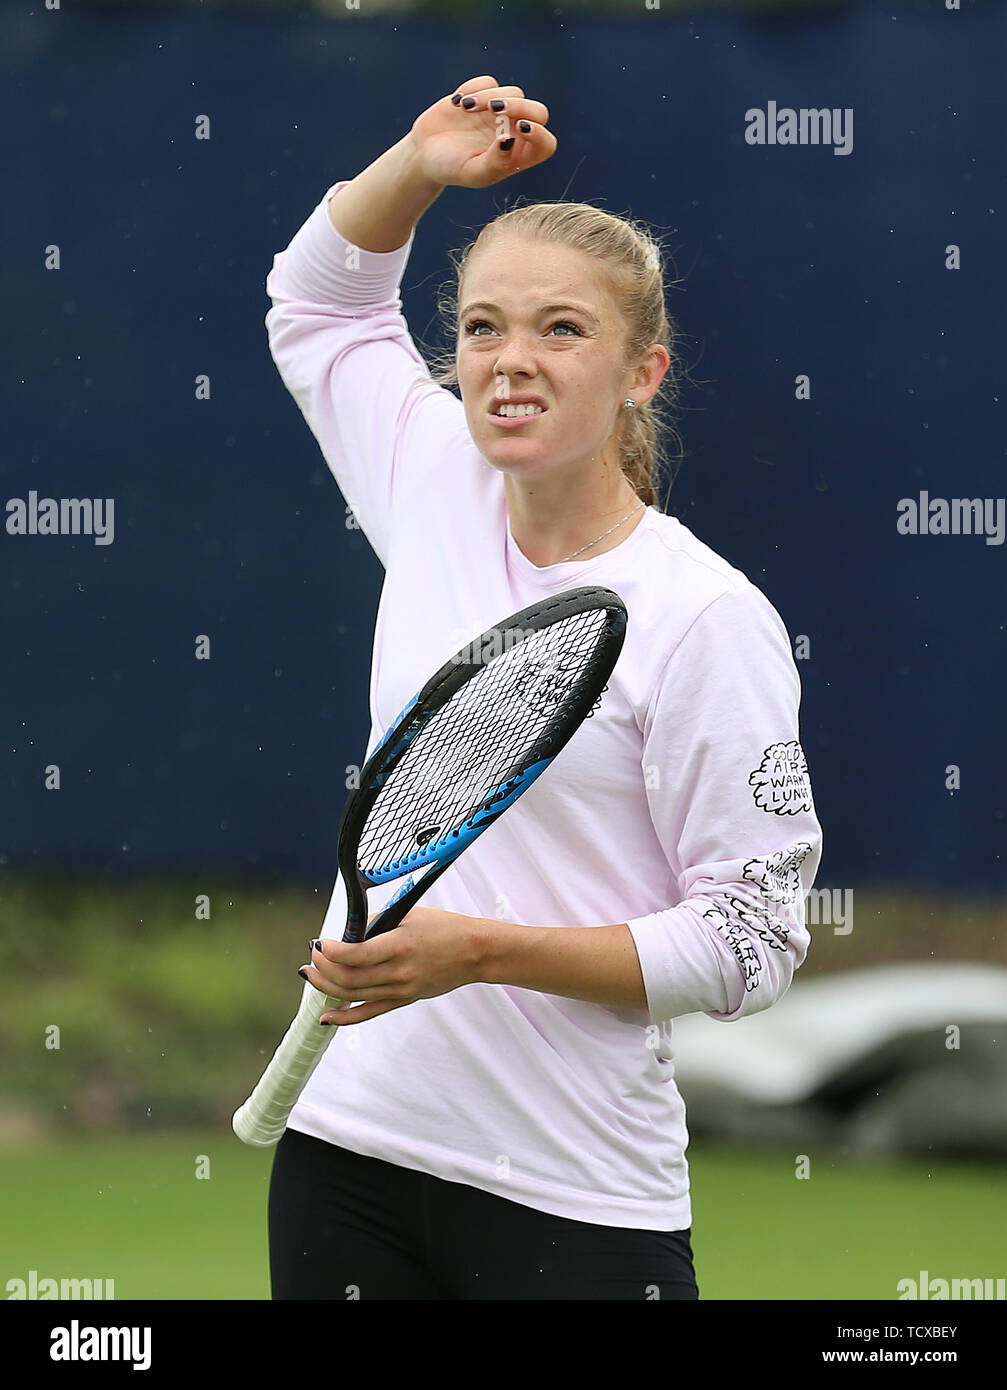 Katie Swan practices during day three of the Nature Valley Open at Nottingham Tennis Centre. Stock Photo